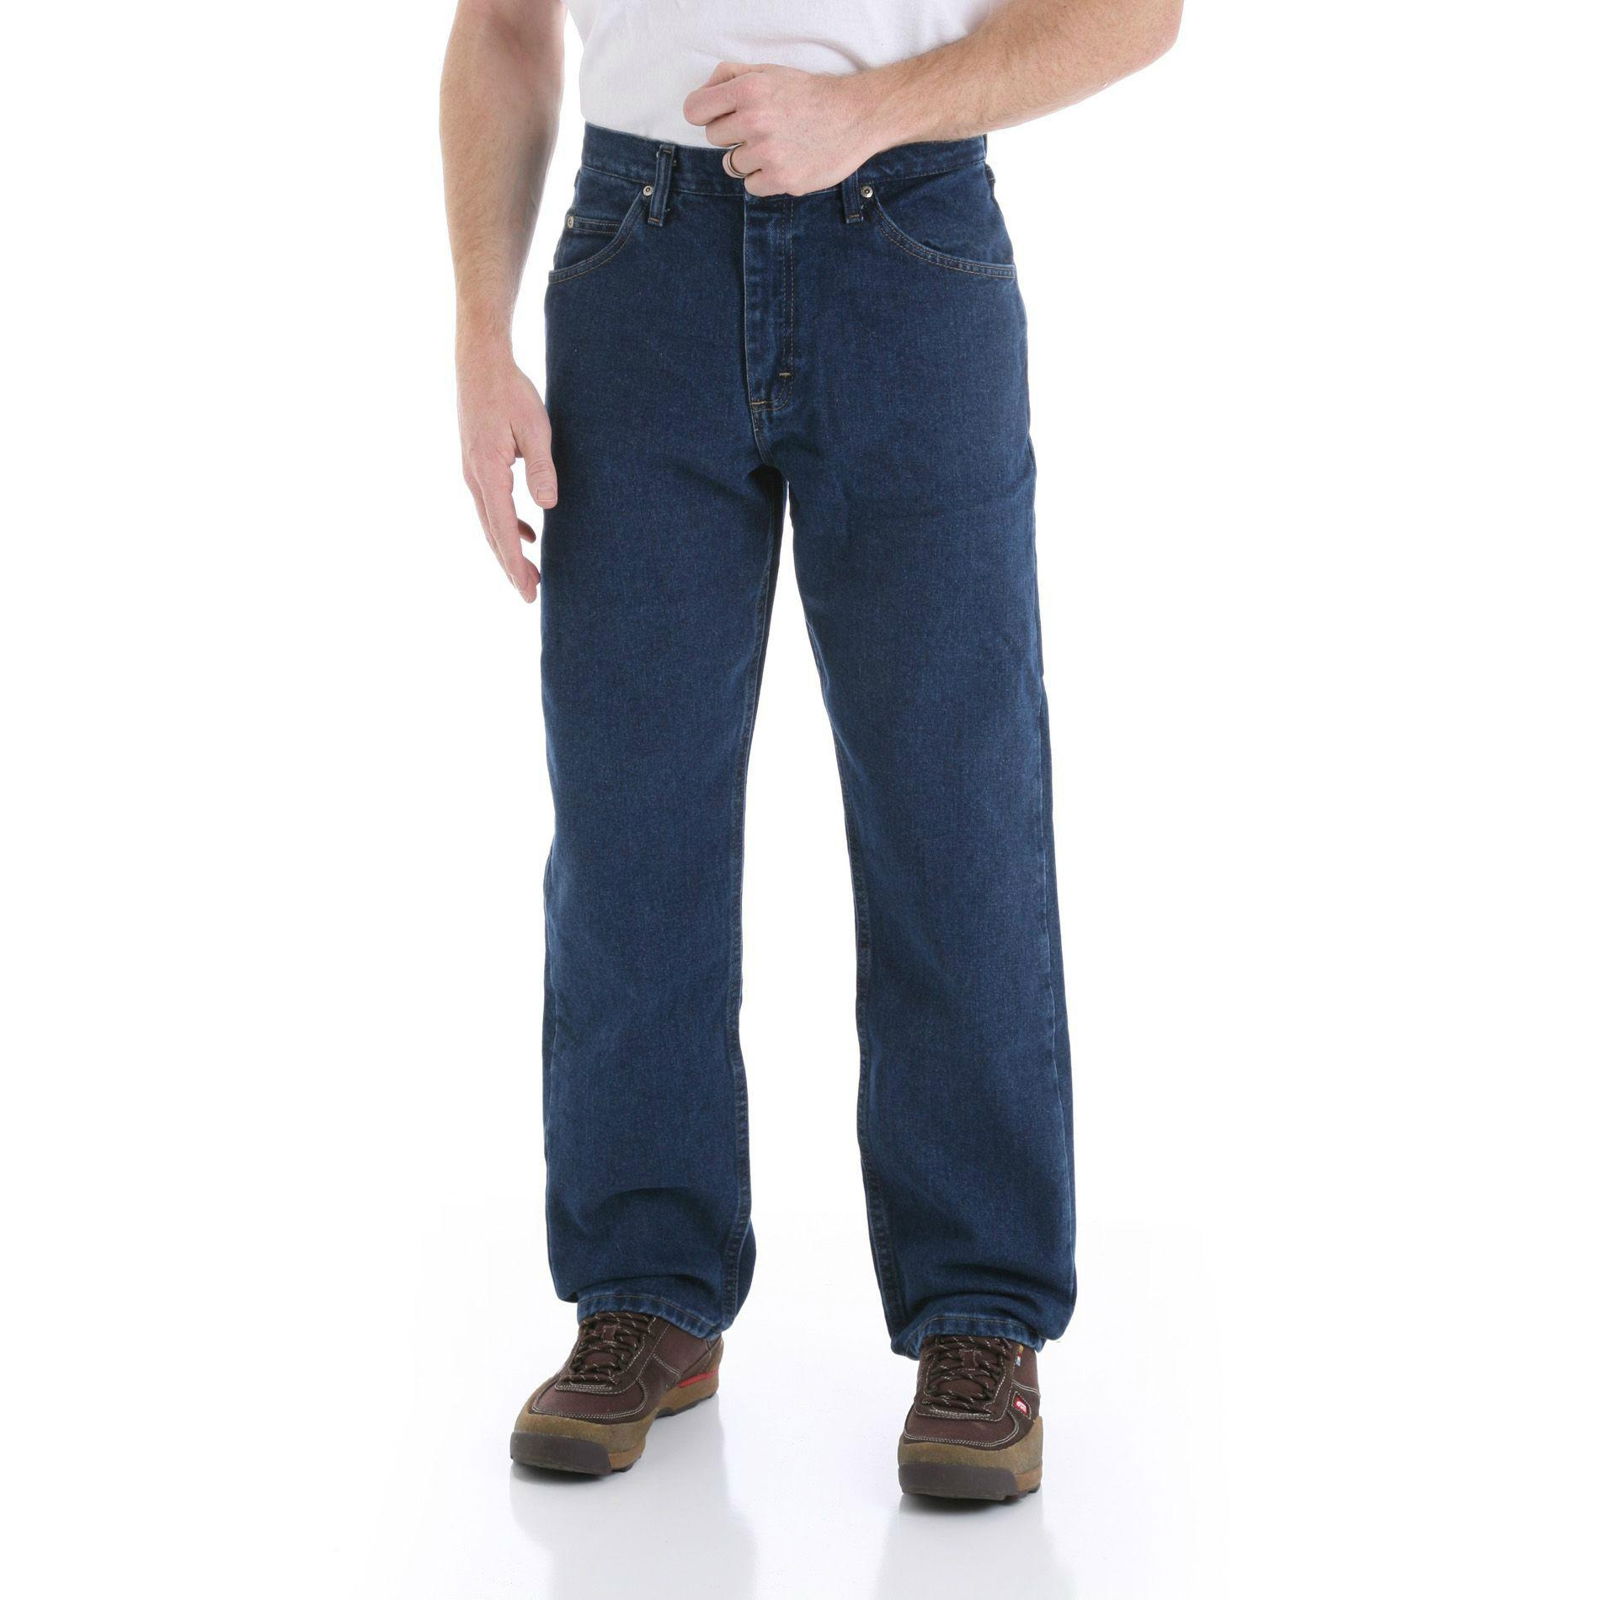 Mens High Quality Fashionable jeans Denim casual latest wholesale straigh fitted 4